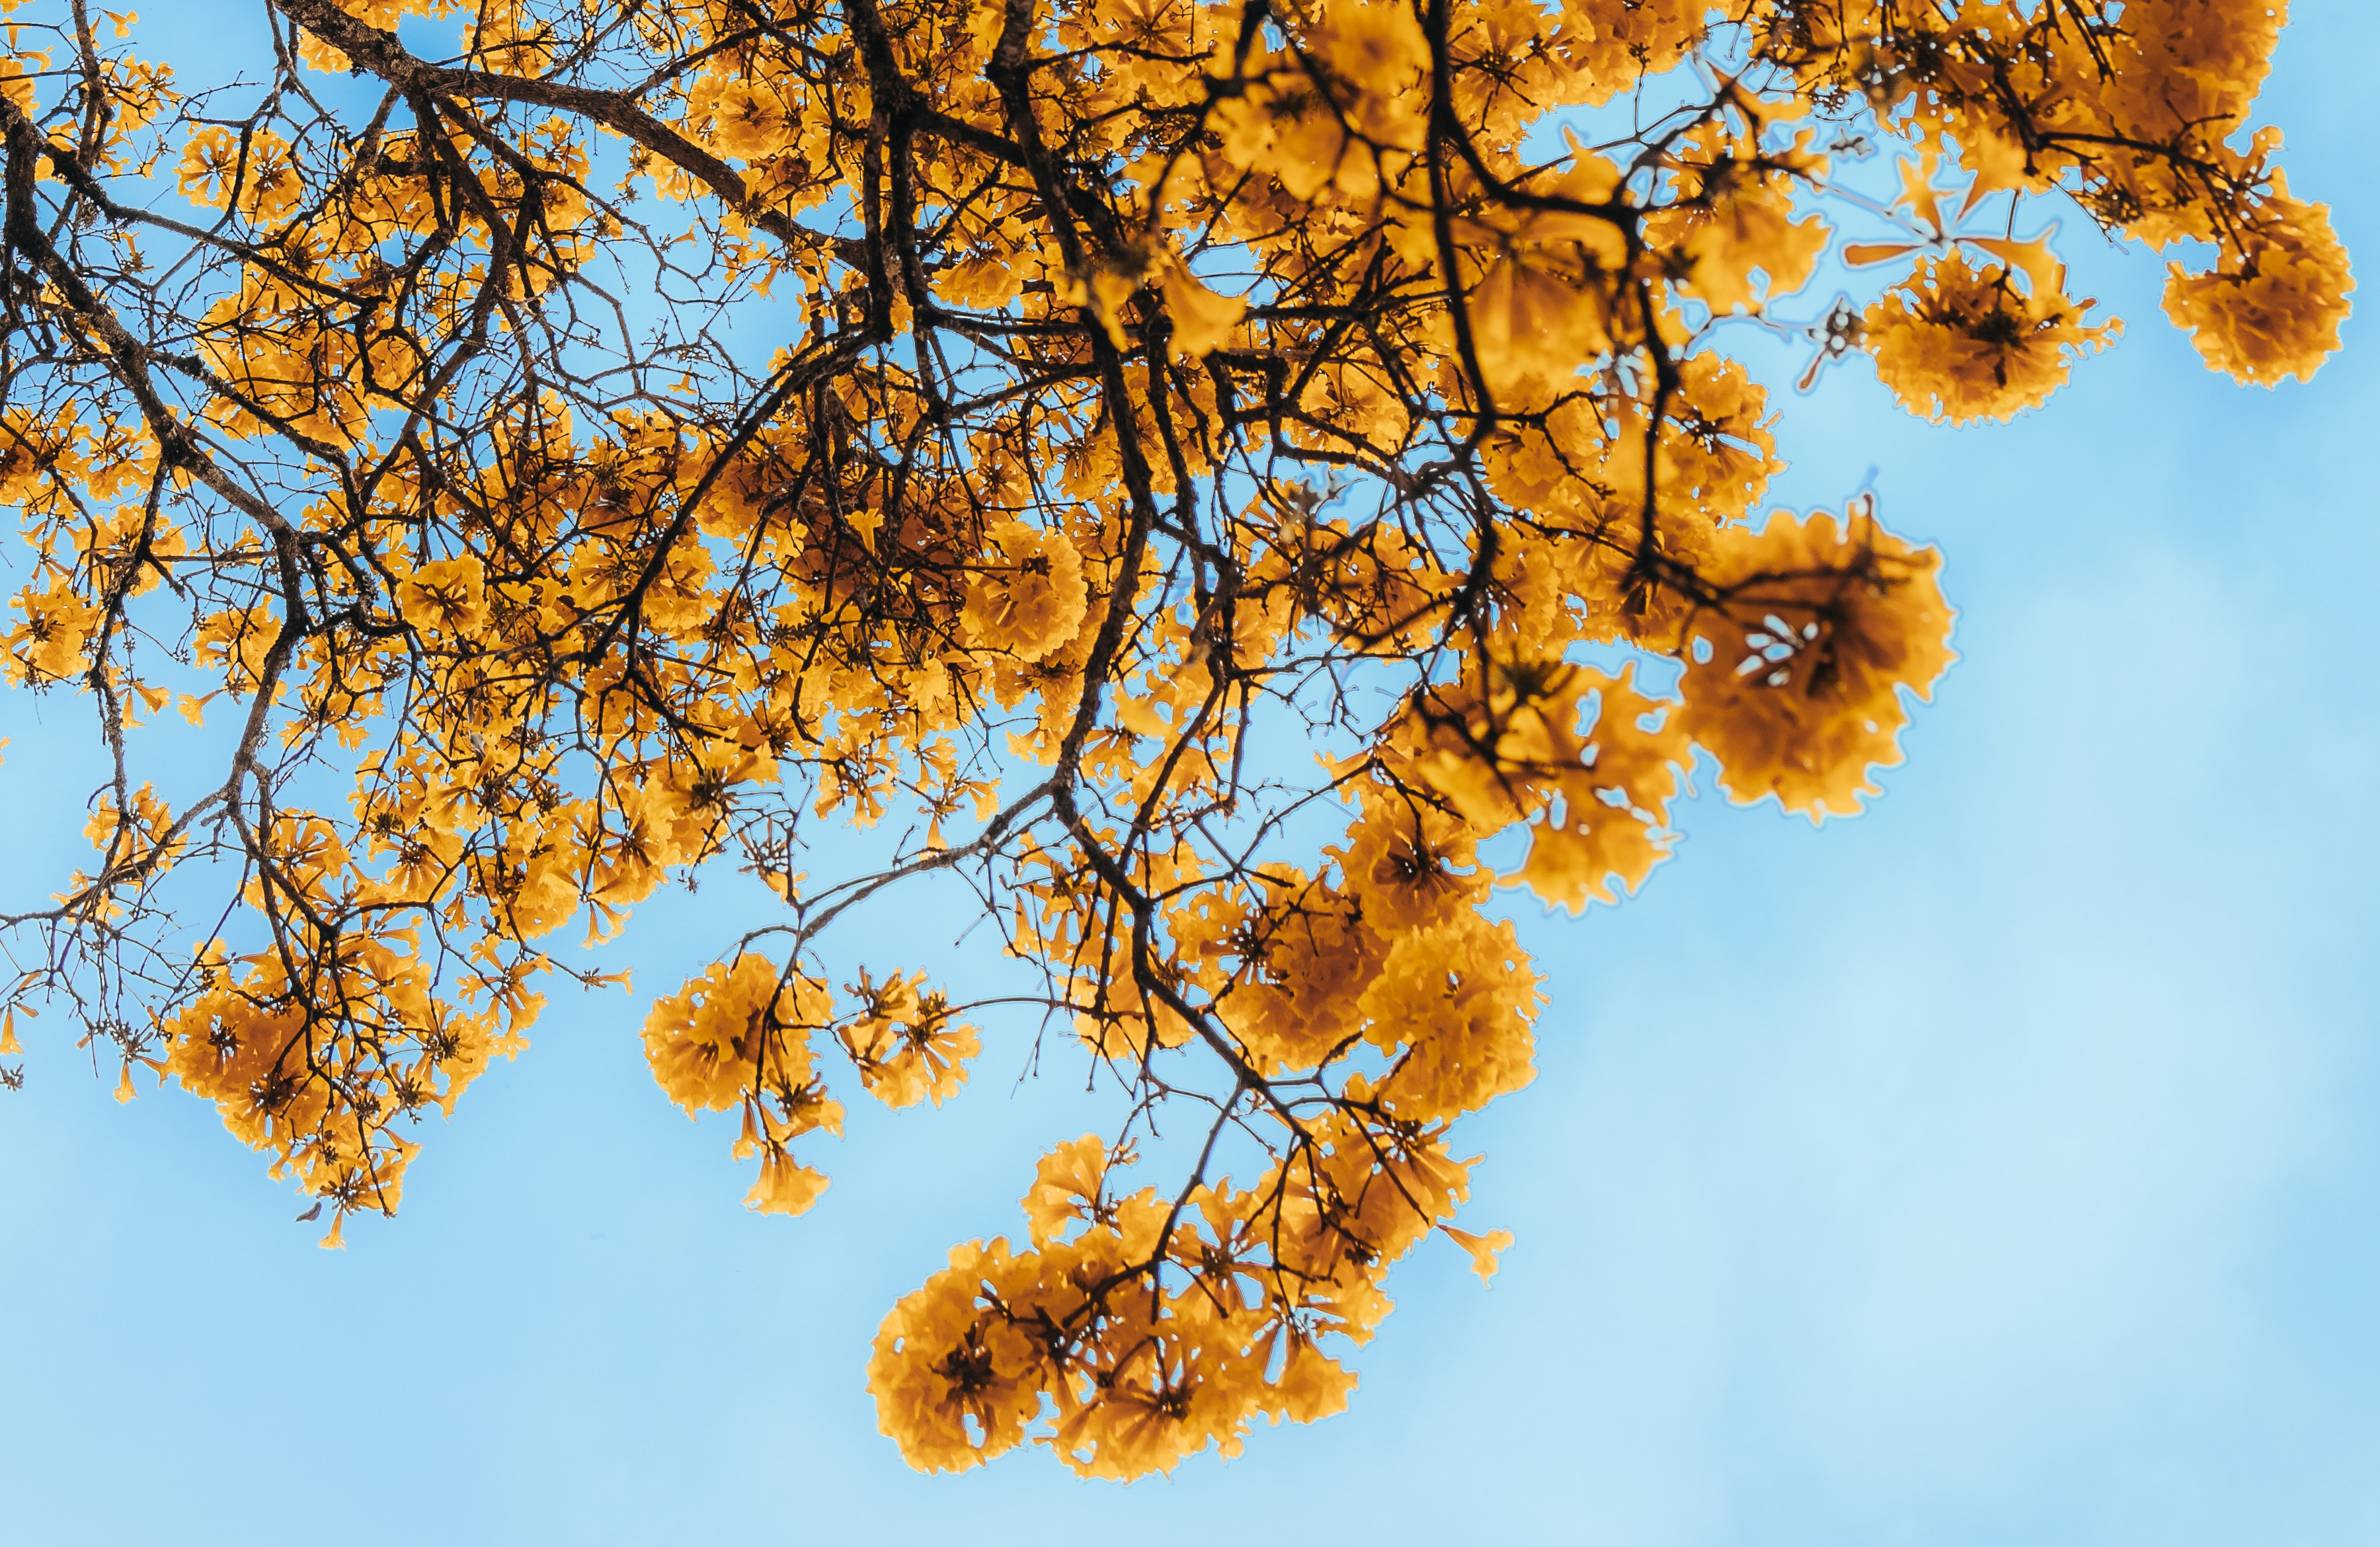 Branches with yellow leaves in fall